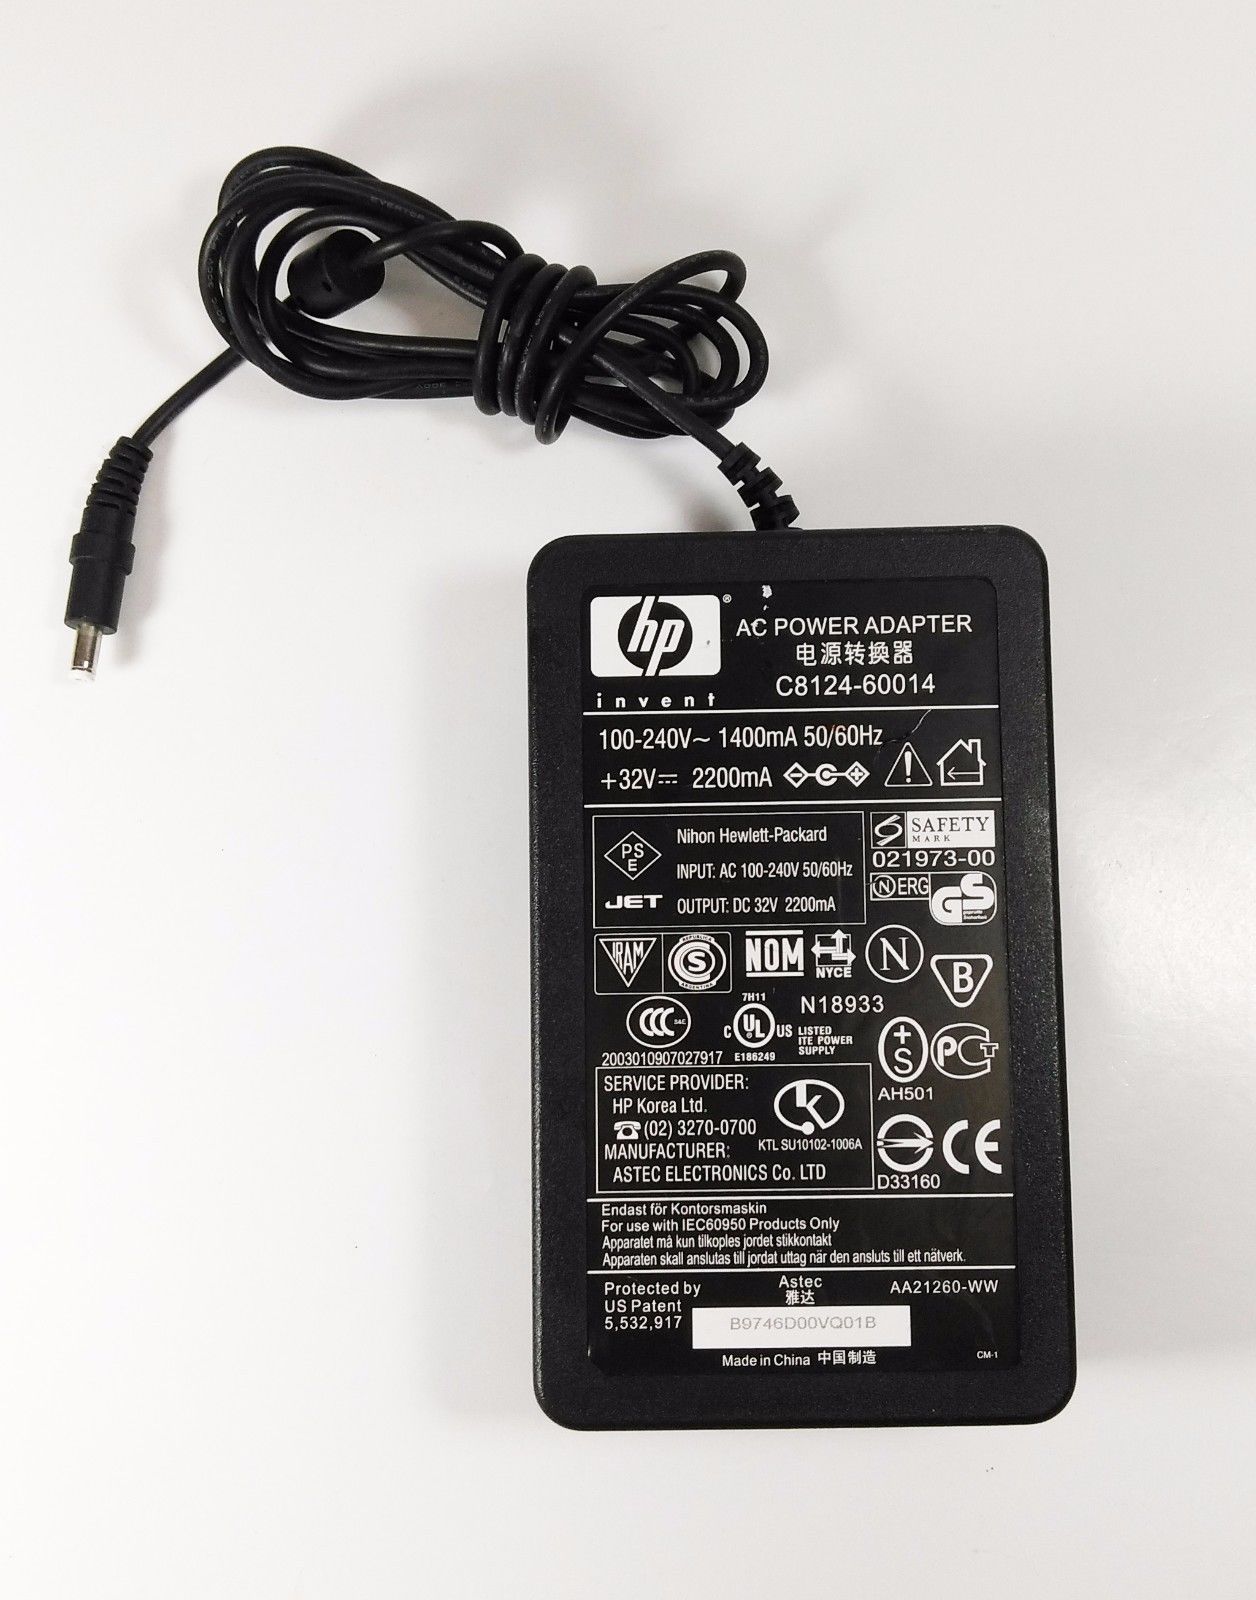 32V 2200mA 70W HP DeskJet C8996A Printer AC Power Adapter Charger